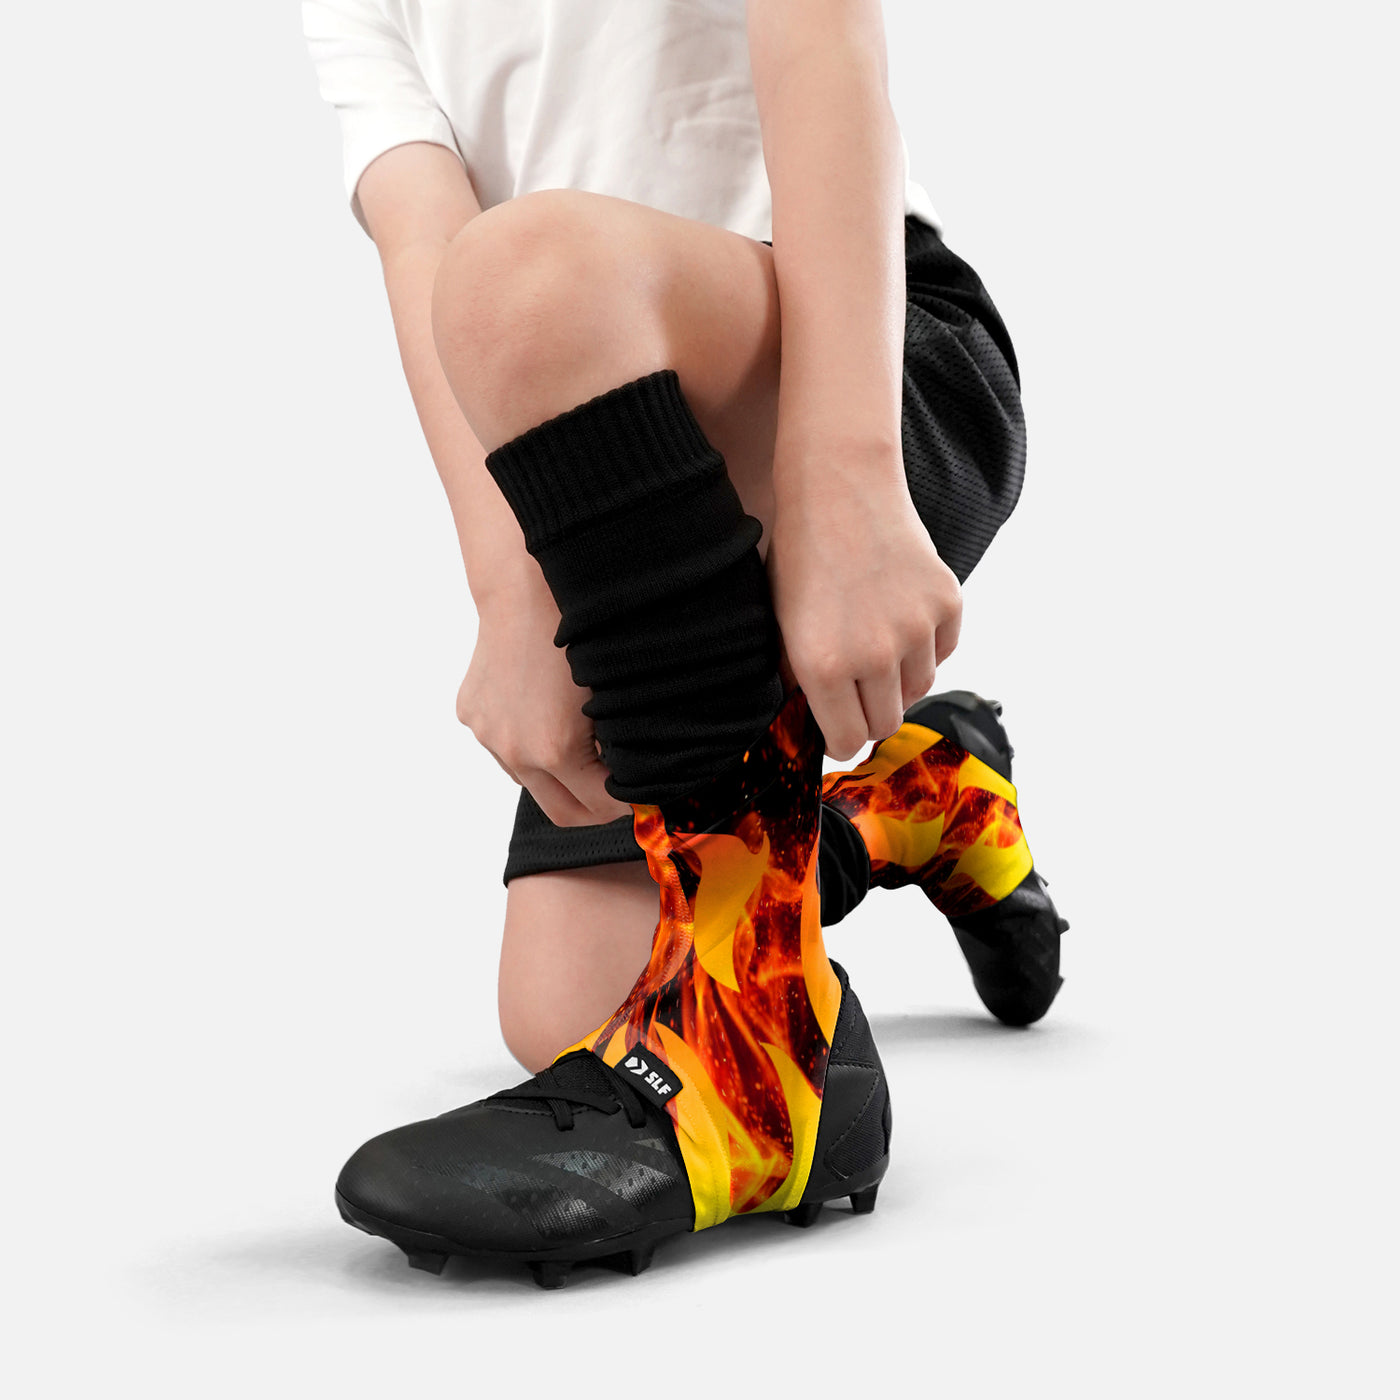 Black Fire Kids Spats / Cleat Covers